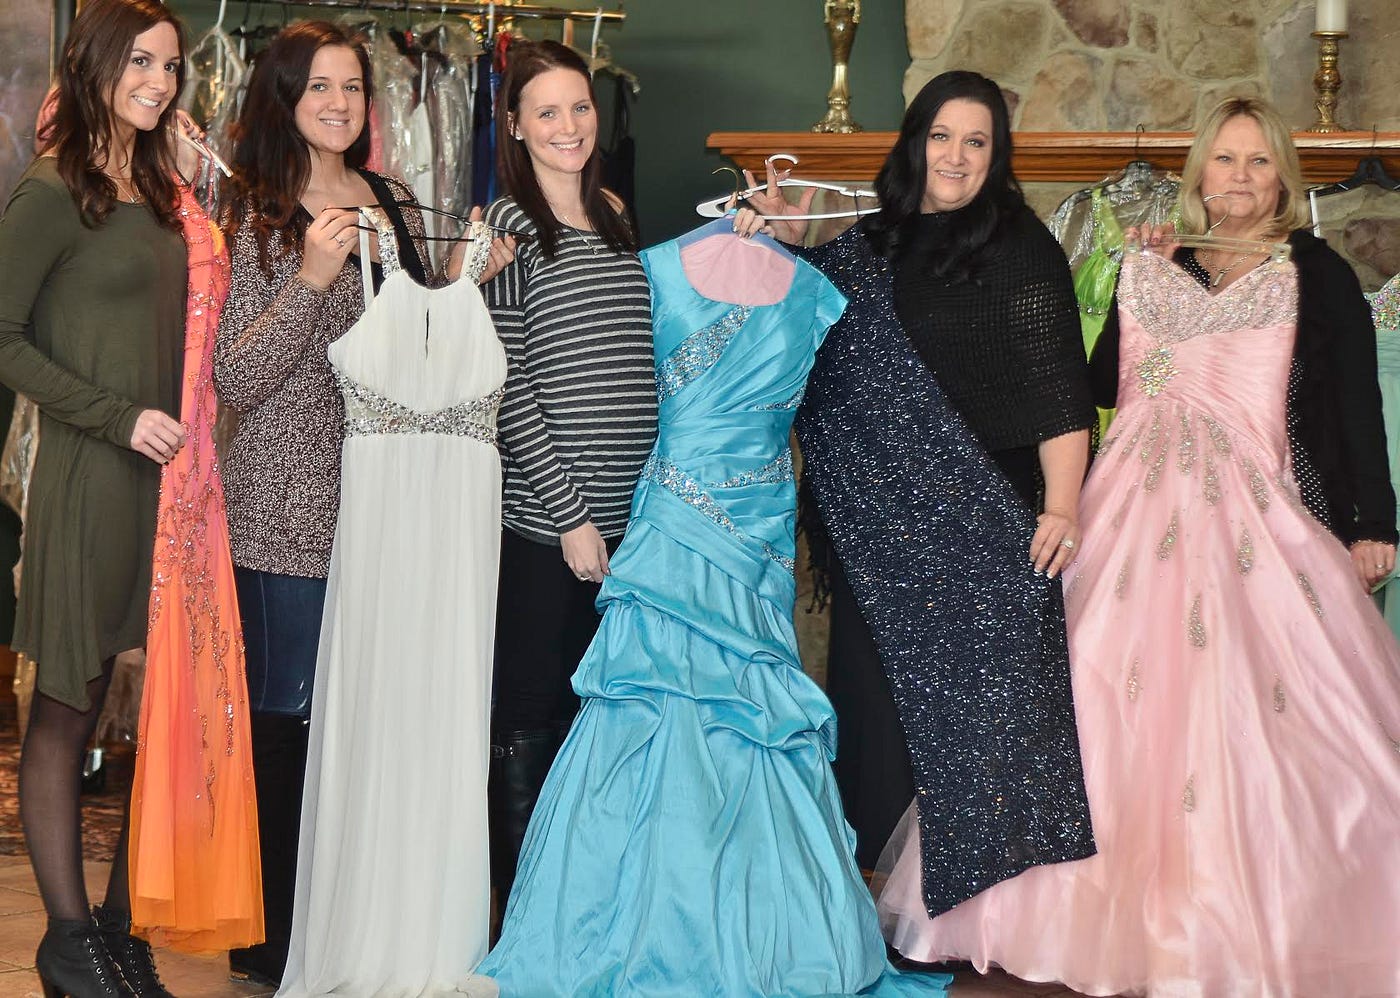 Local non-profit provides free dresses to girls just before prom